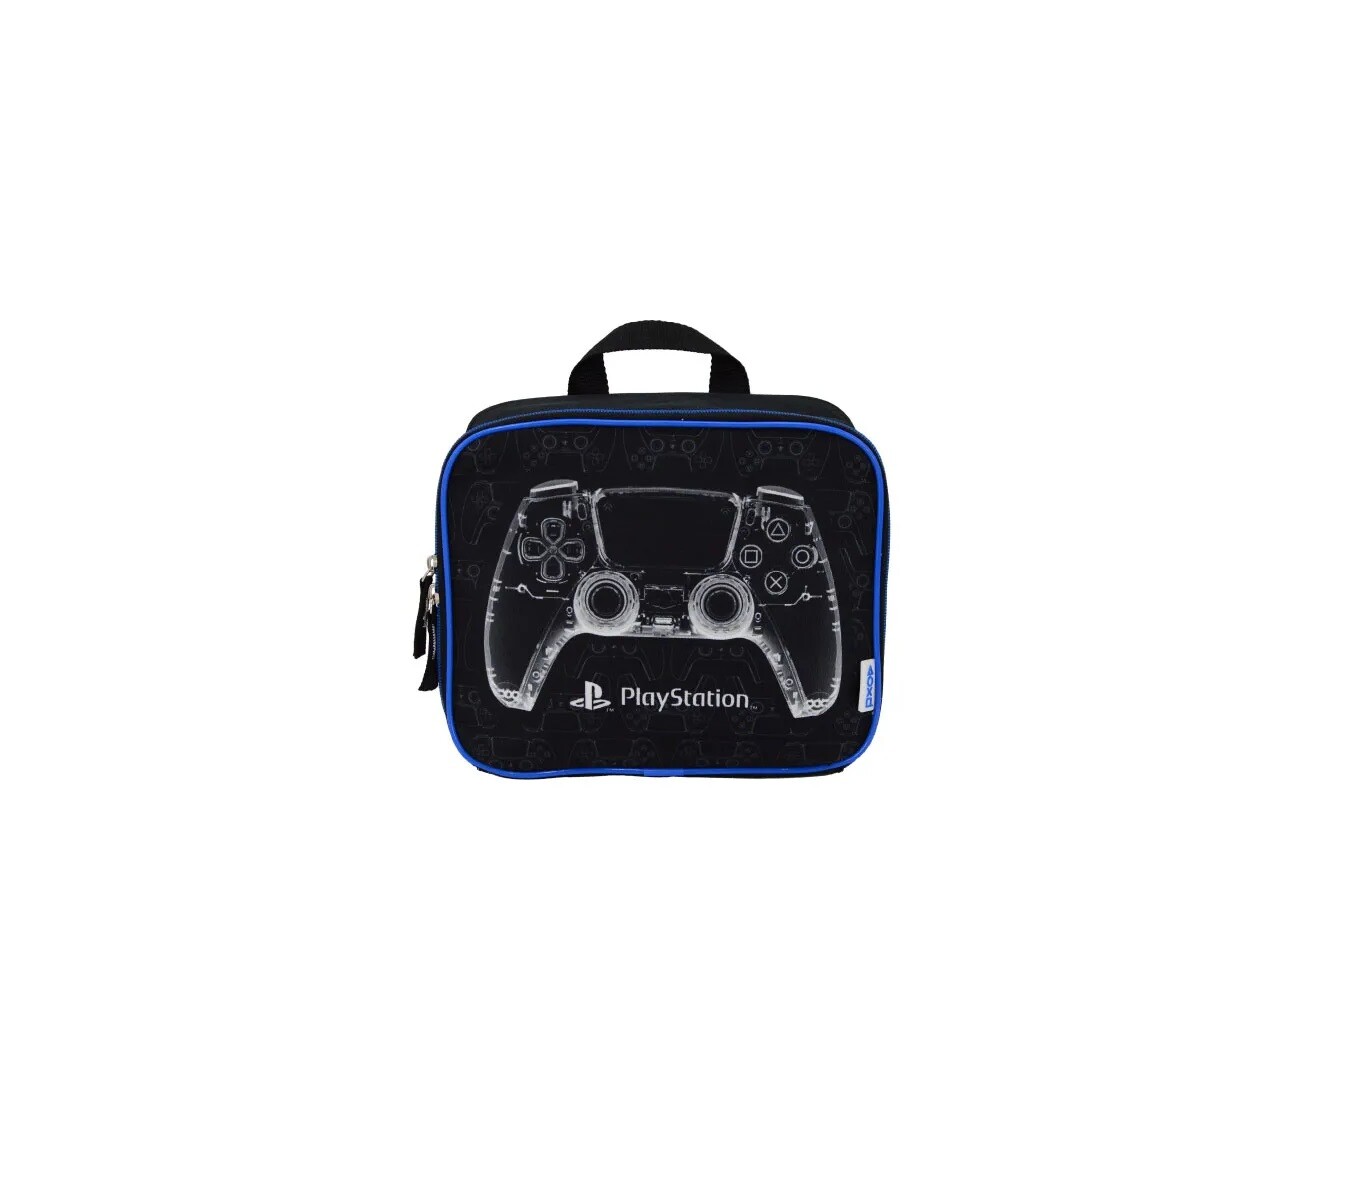 Playstation X-Ray Backpack Lunch Bag - Único 